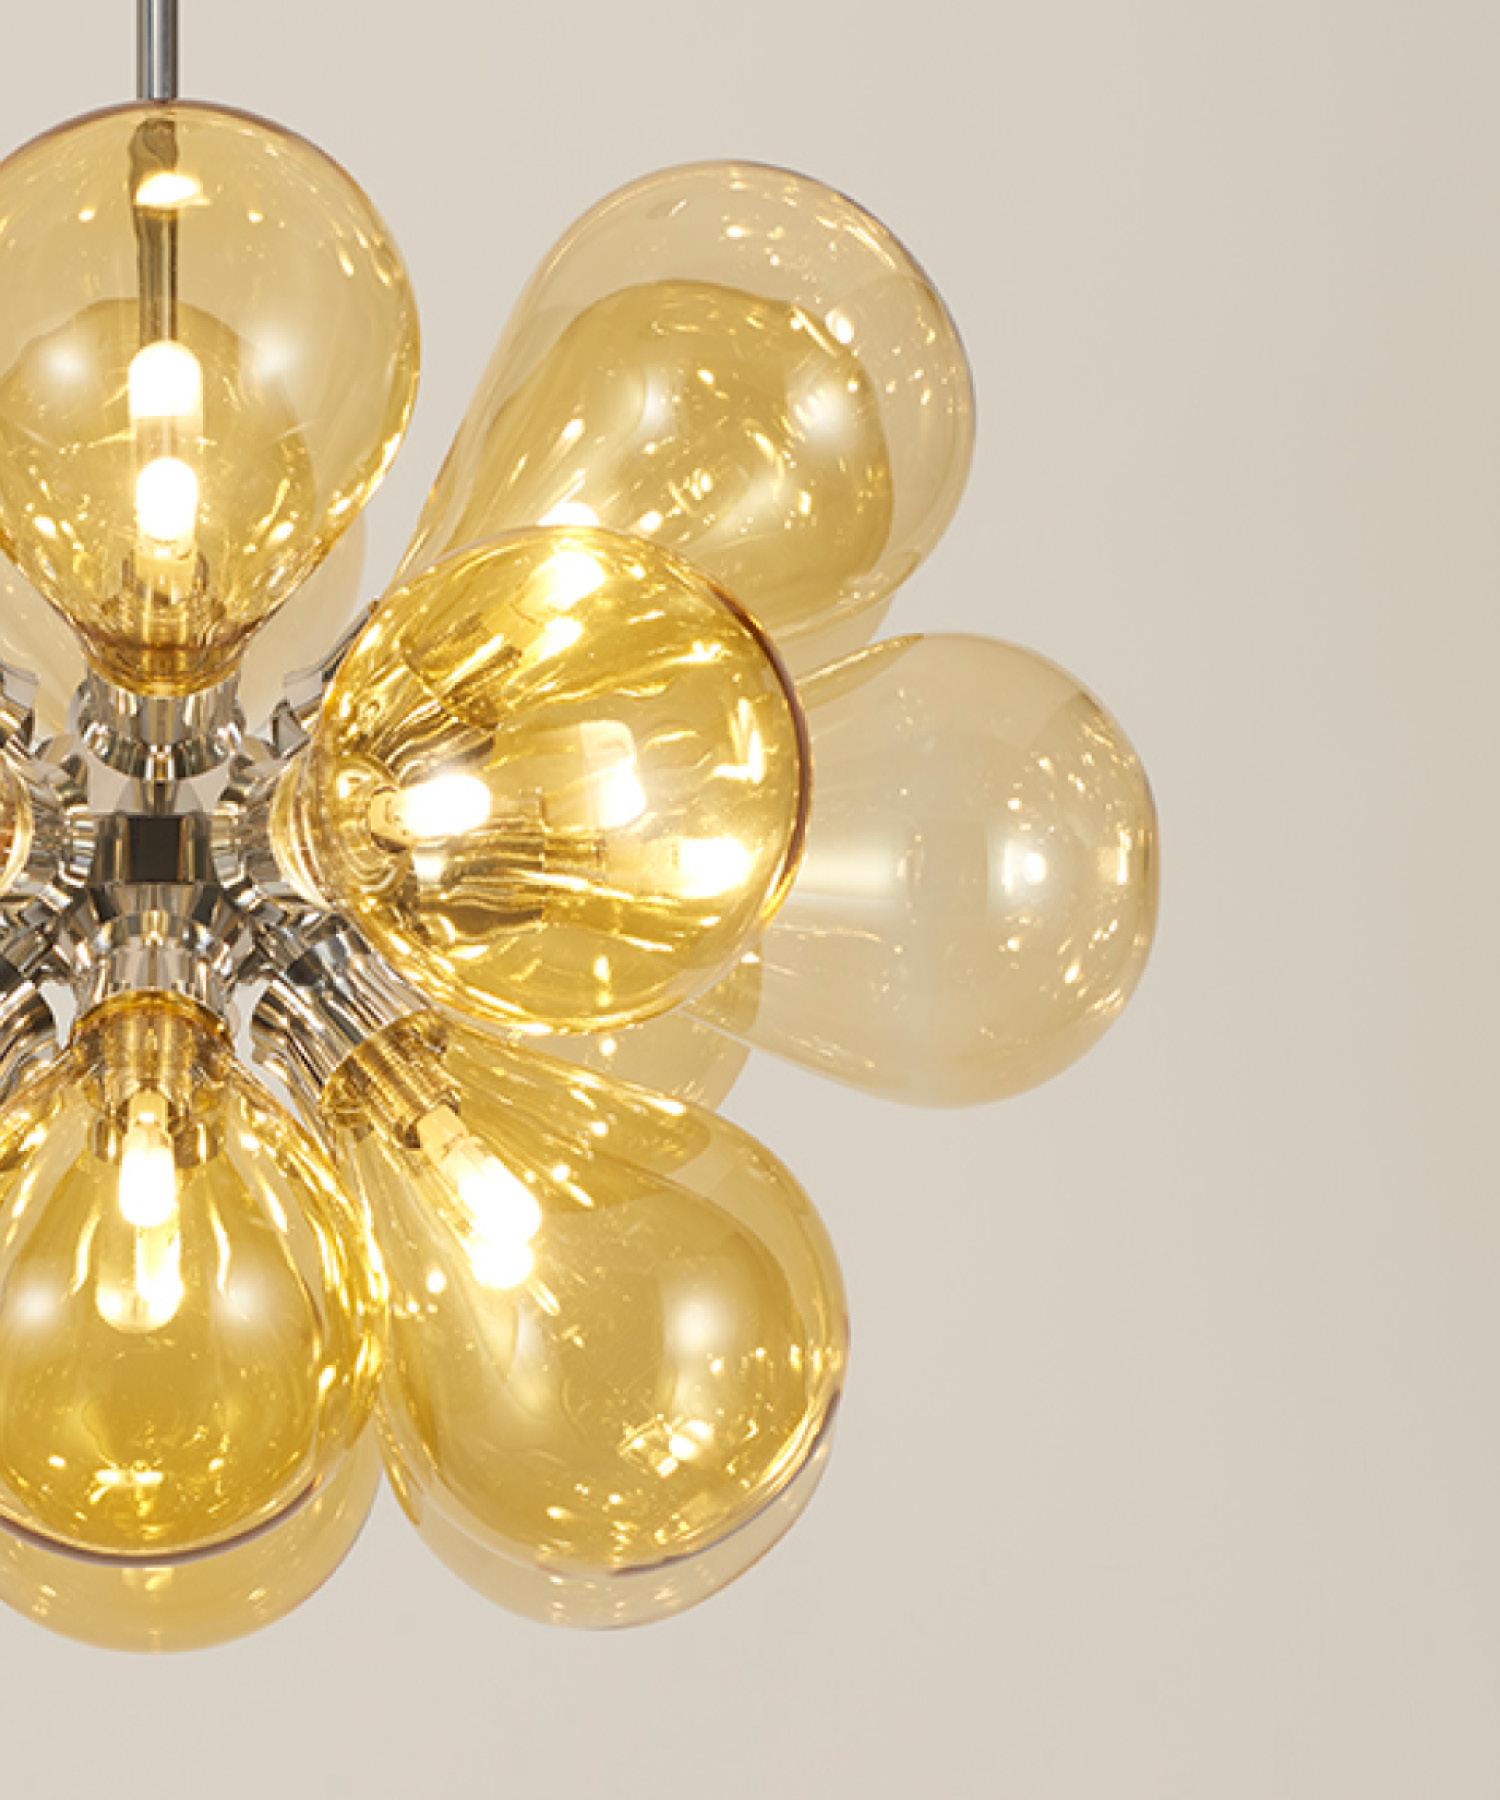 Cintola Maxi Pendant in Polished Aluminium with 18 Handblown Frosted Globes For Sale 5